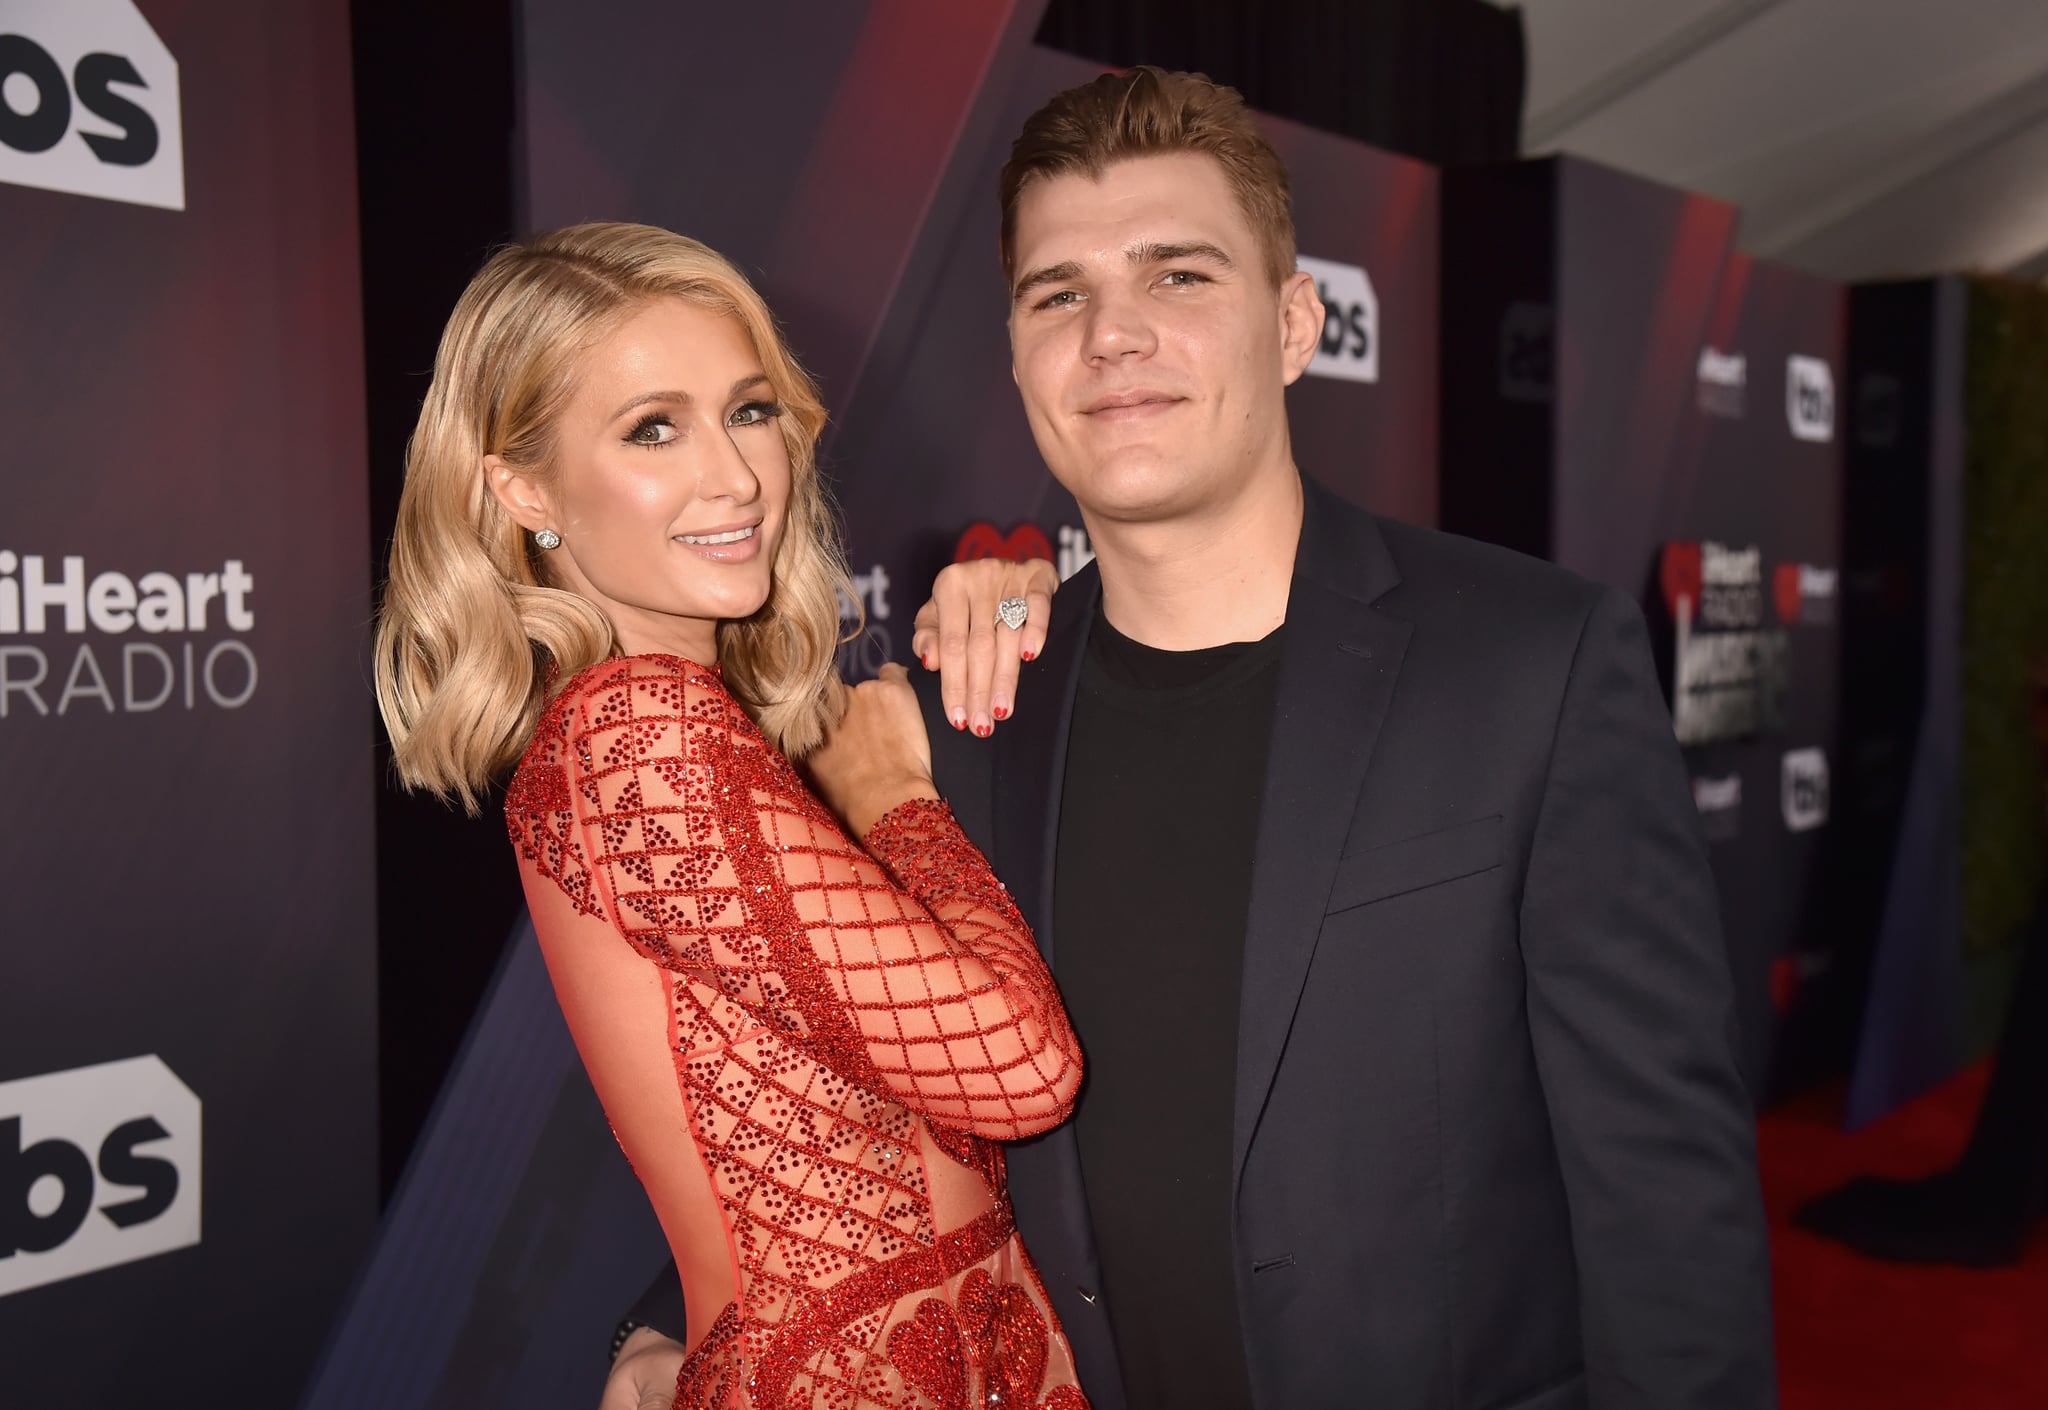 INGLEWOOD, CA - MARCH 11:  Paris Hilton and Chris Zylka arrives at the 2018 iHeartRadio Music Awards which broadcasted live on TBS, TNT, and truTV at The Forum on March 11, 2018 in Inglewood, California.  (Photo by Jeff Kravitz/Getty Images for iHeartMedia)